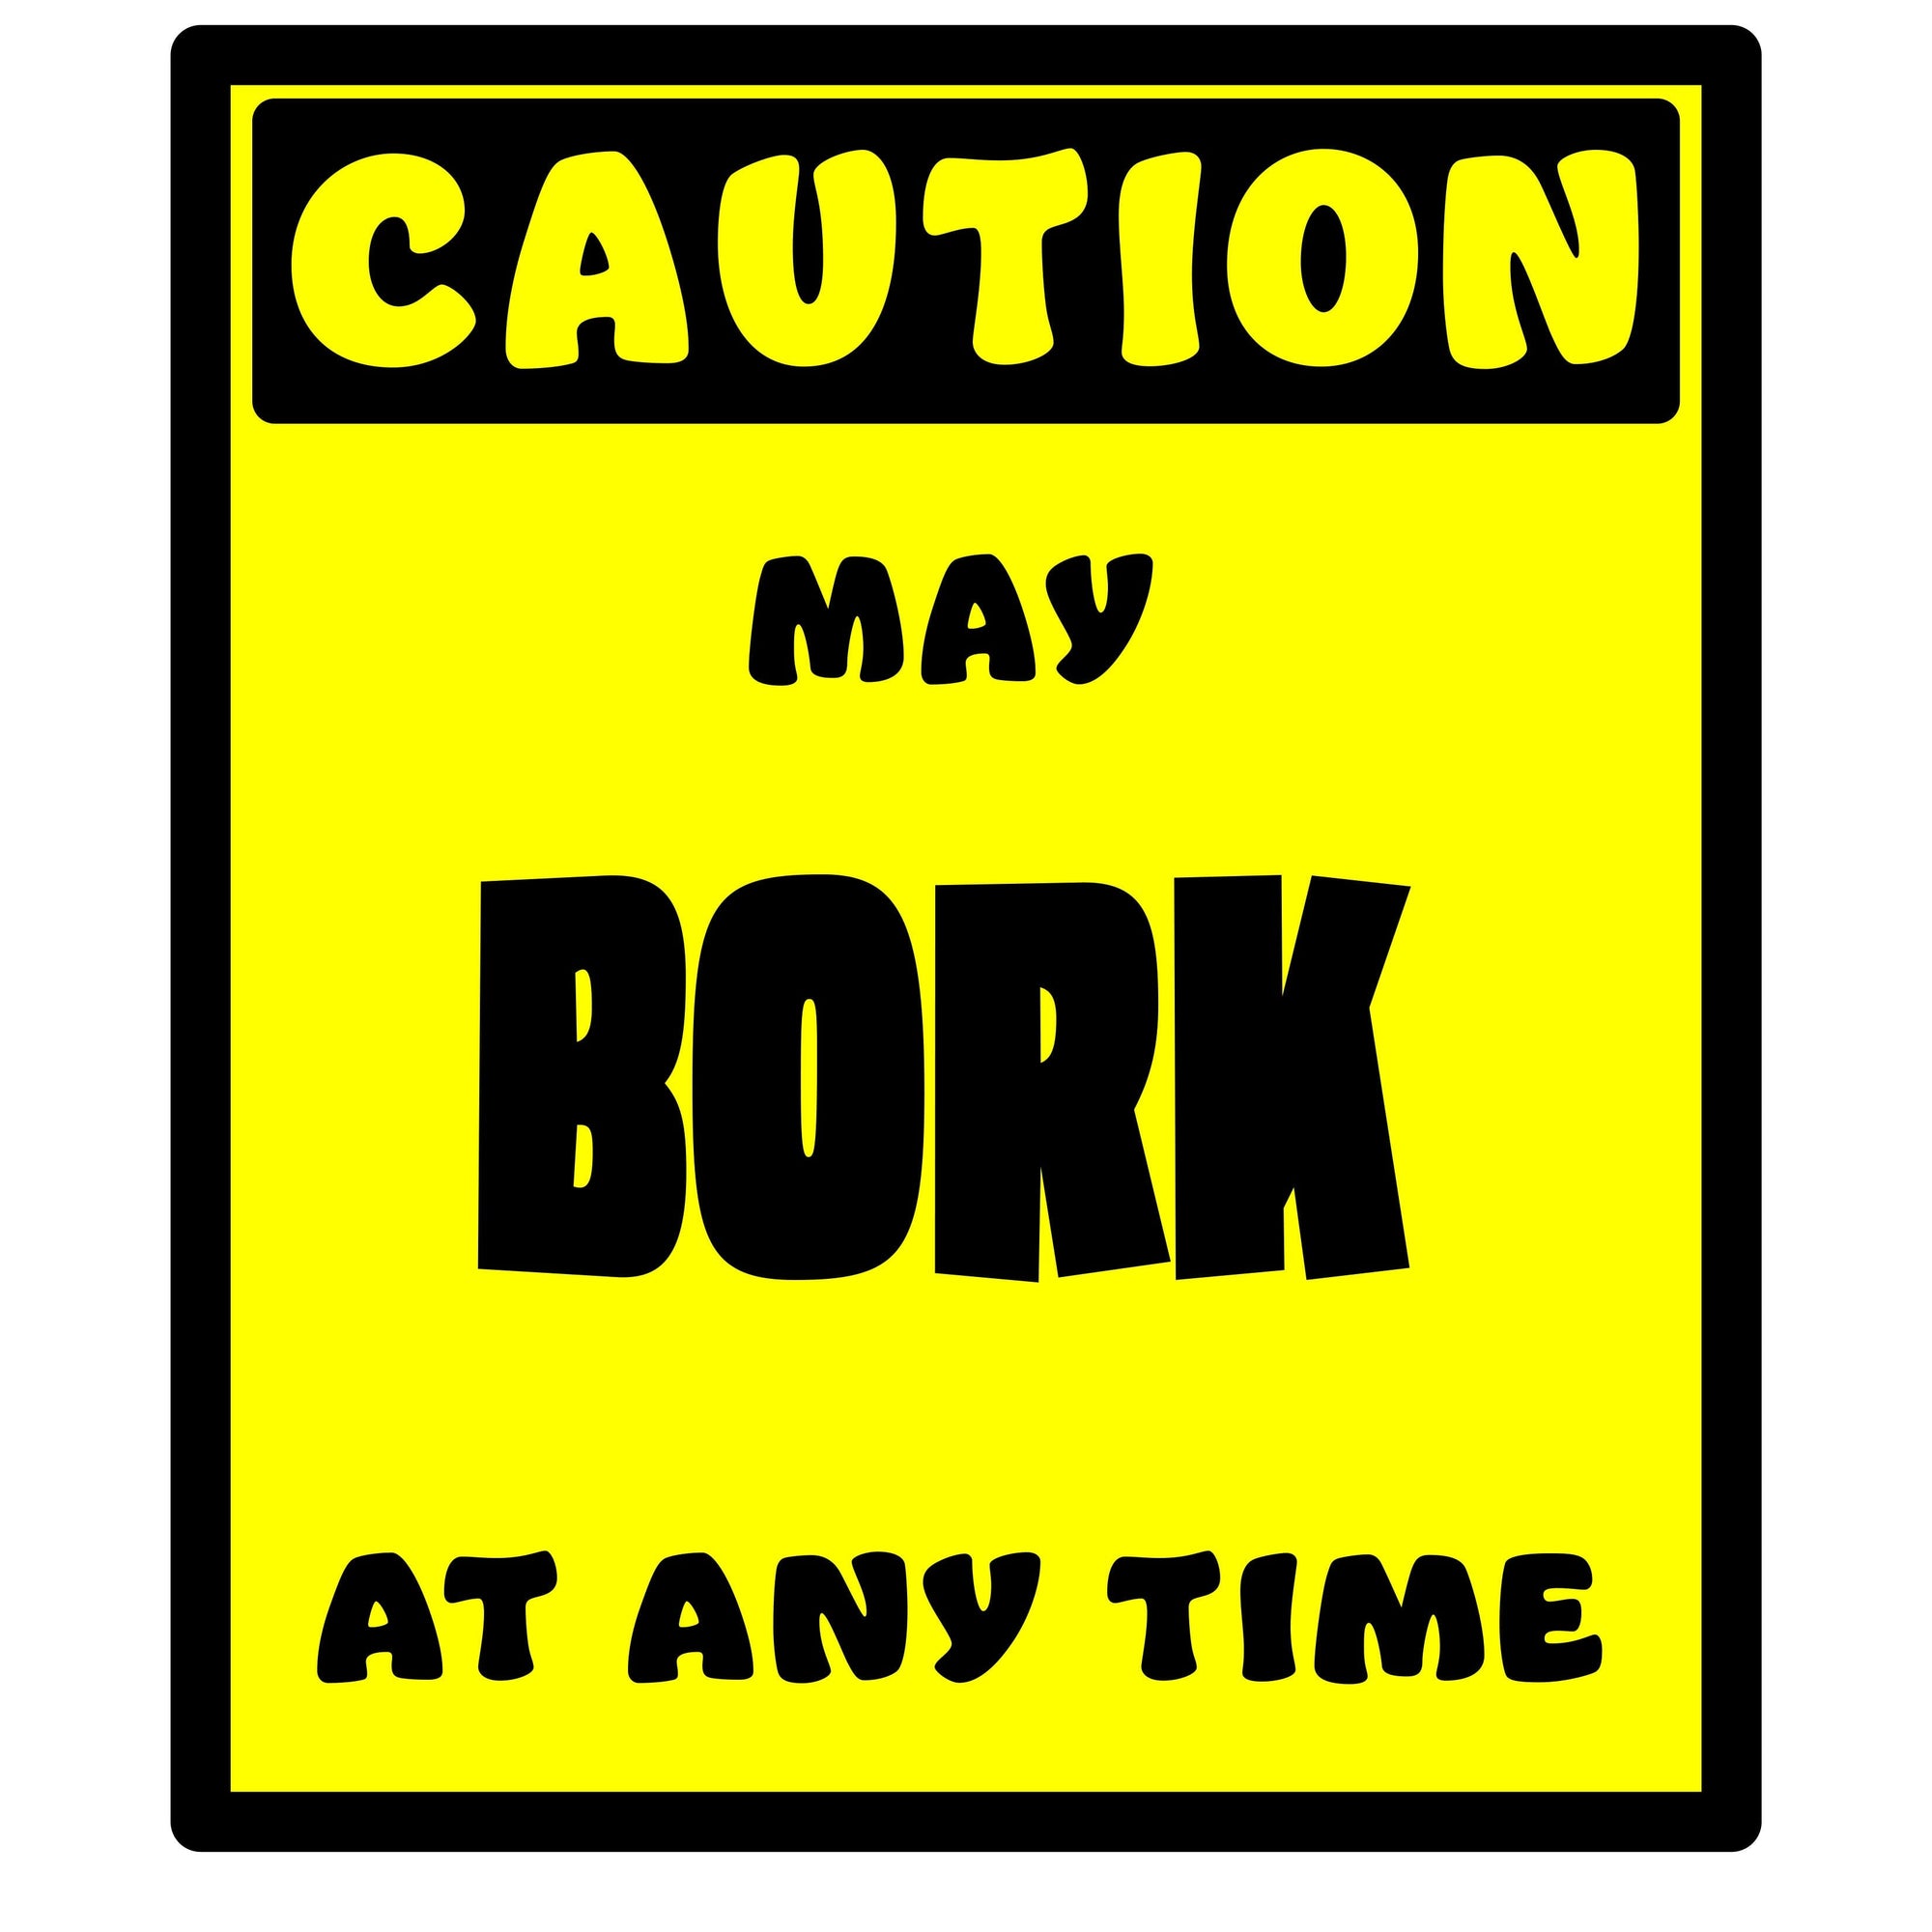 Whootorca - Caution! Series - Caution! May BORK at any time!